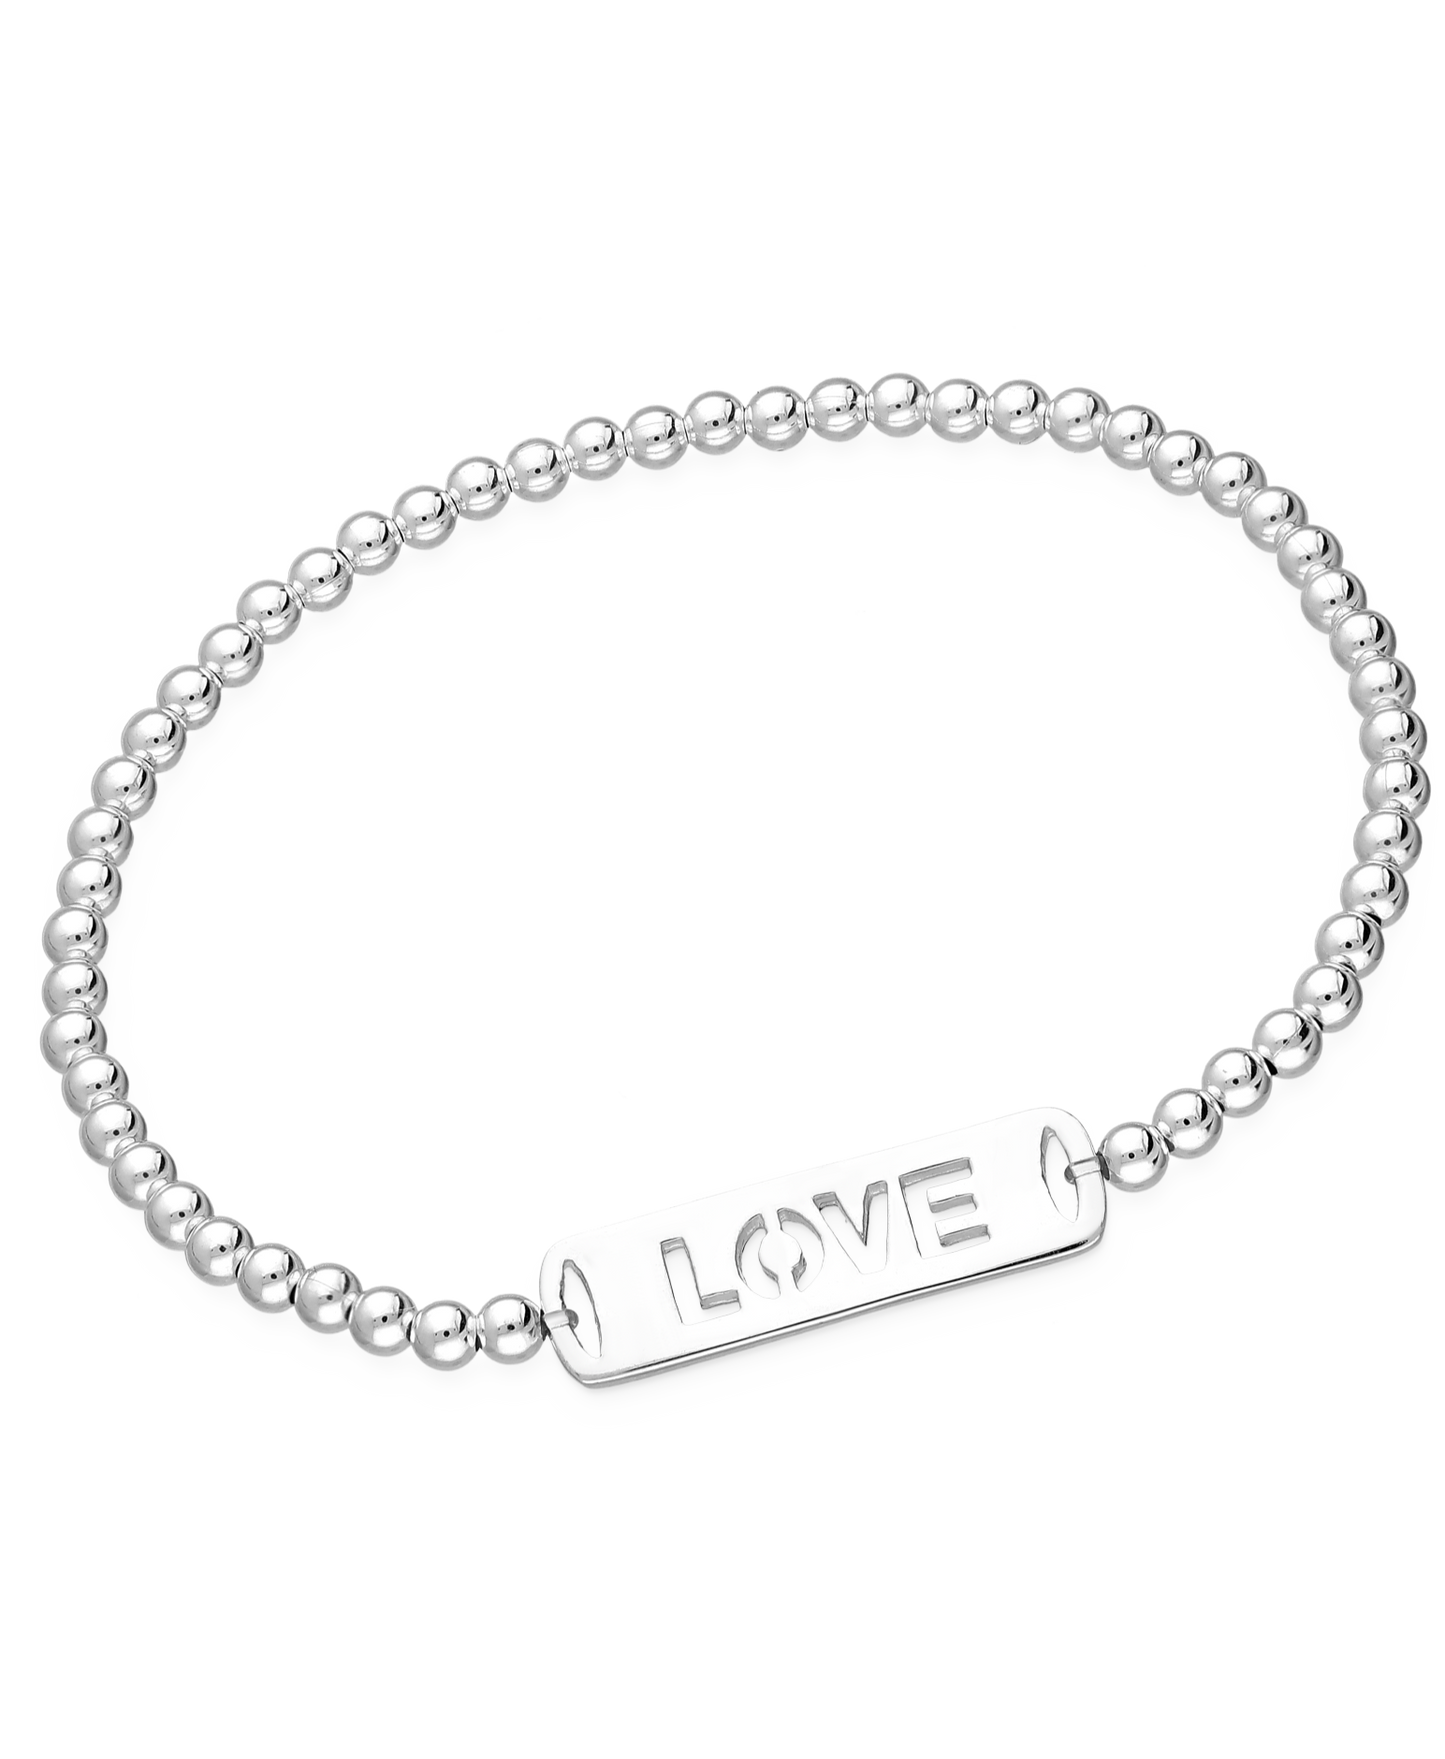 Sterling Silver Ball Stretch Bracelet with Message "LOVE"